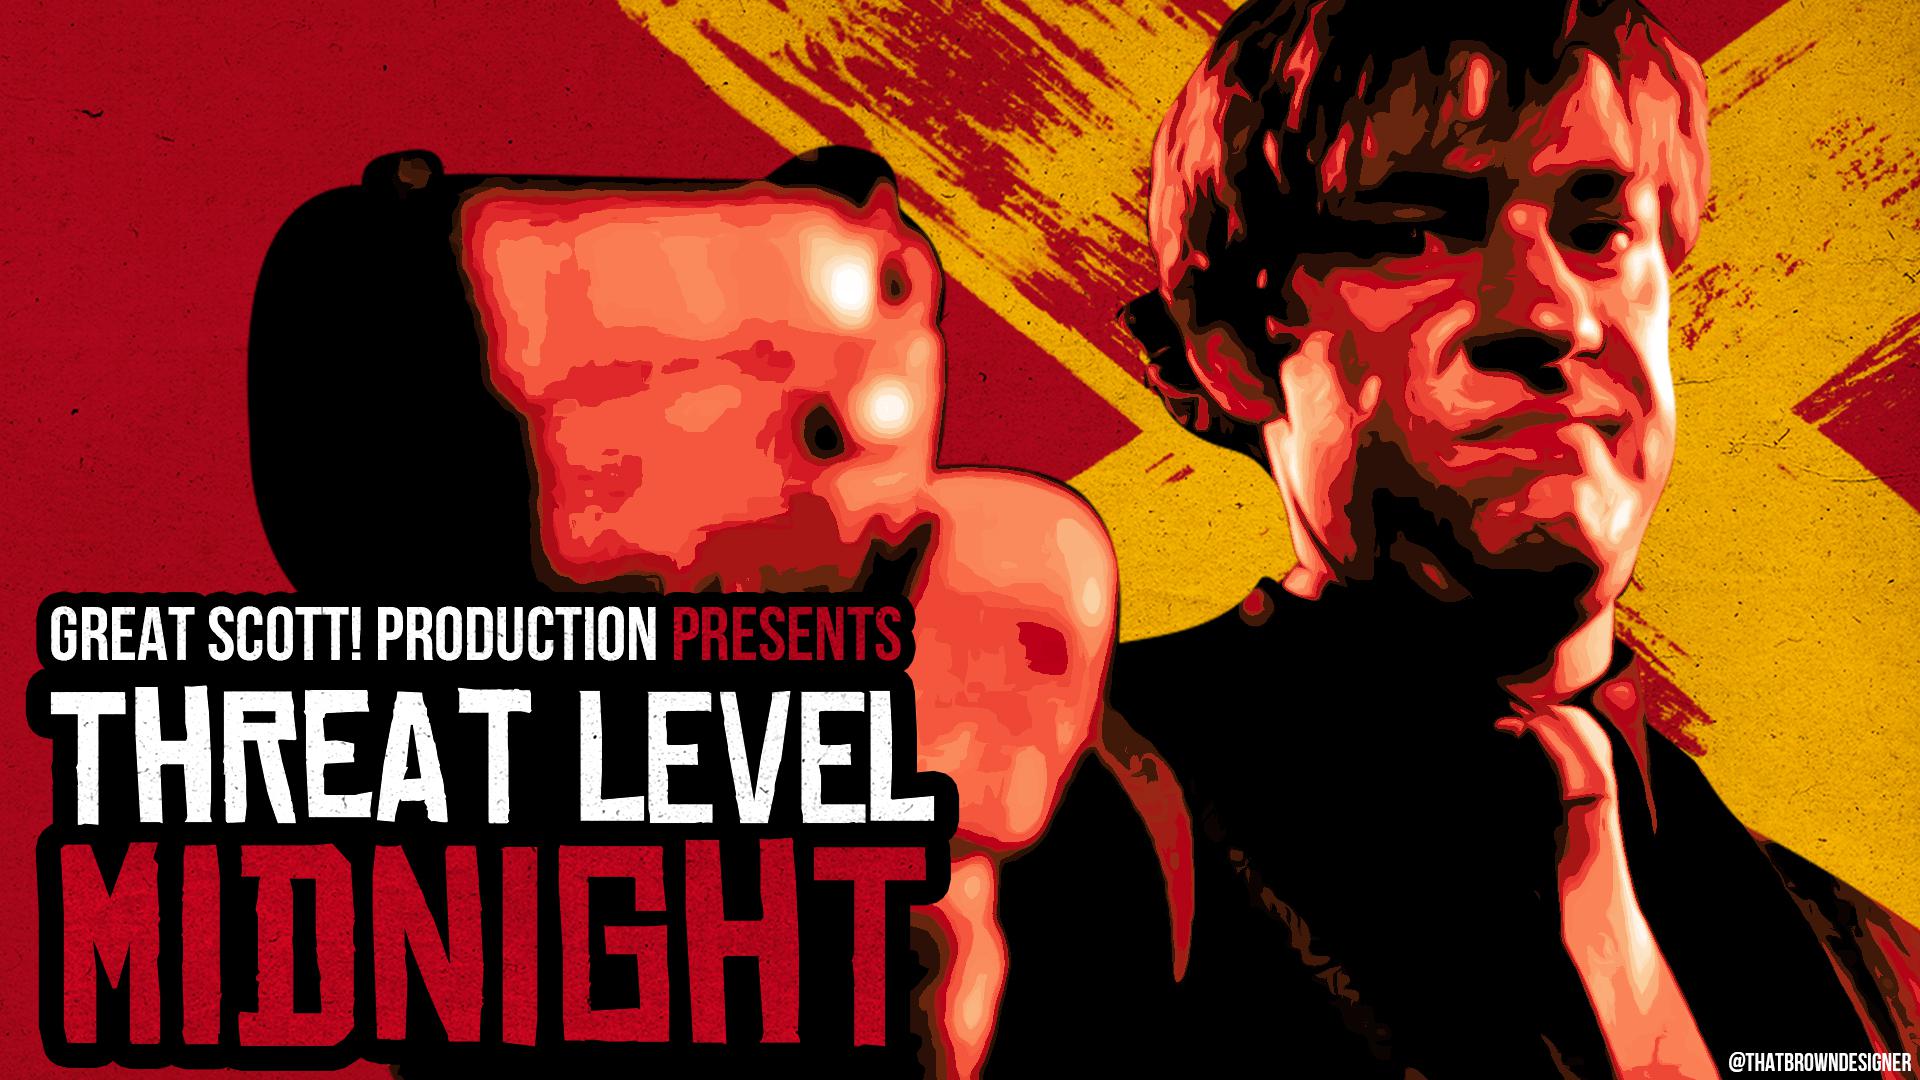 I Made A GTA Style Poster Of Threat Level Midnight And U Baked__beans29 Suggested That I Should Make One With Goldenface In Red Dead Redemption Style. Here It Is. Hope You Like It